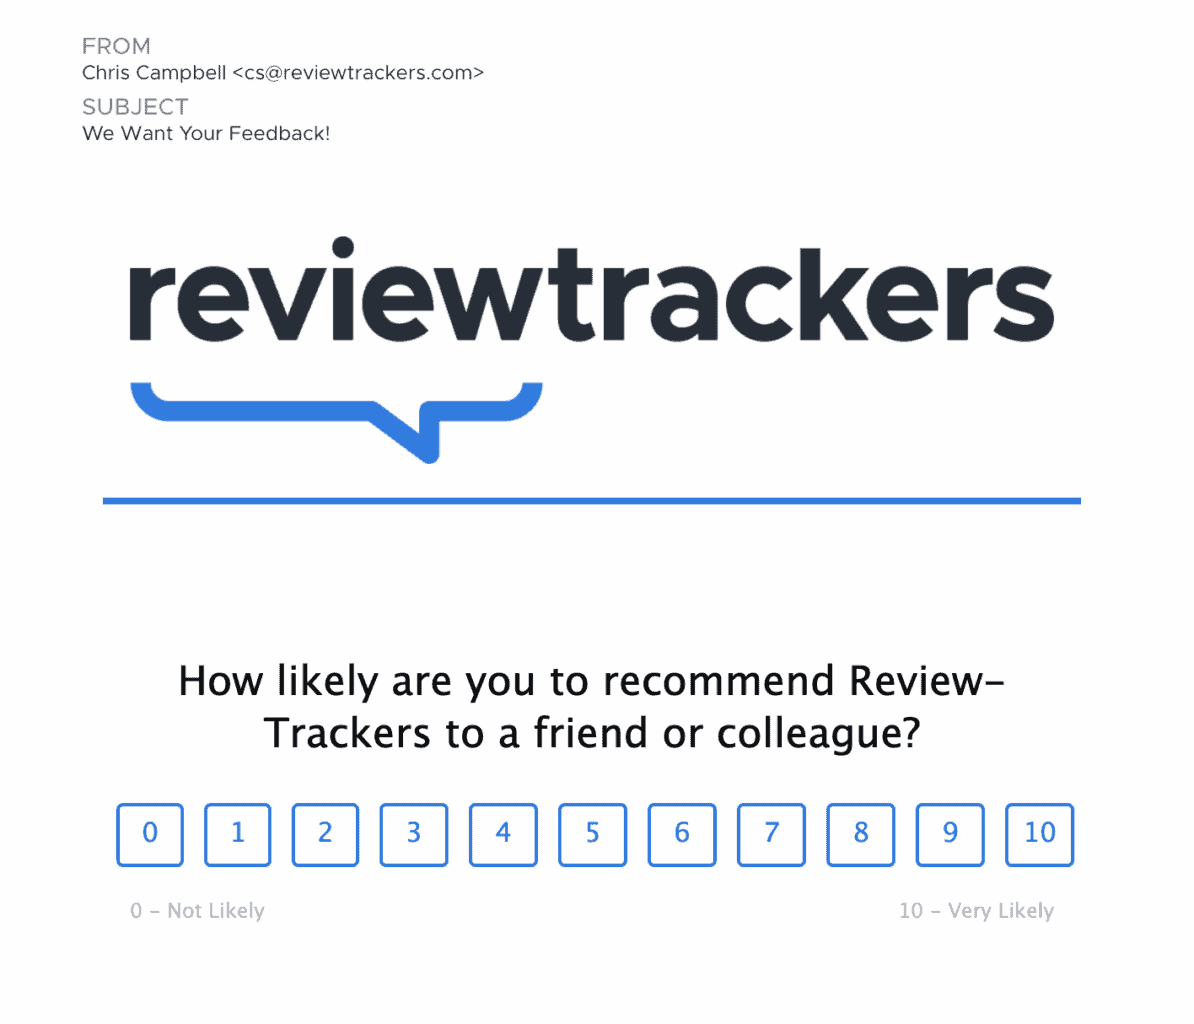 An example of an NPS survey to drive new reviews